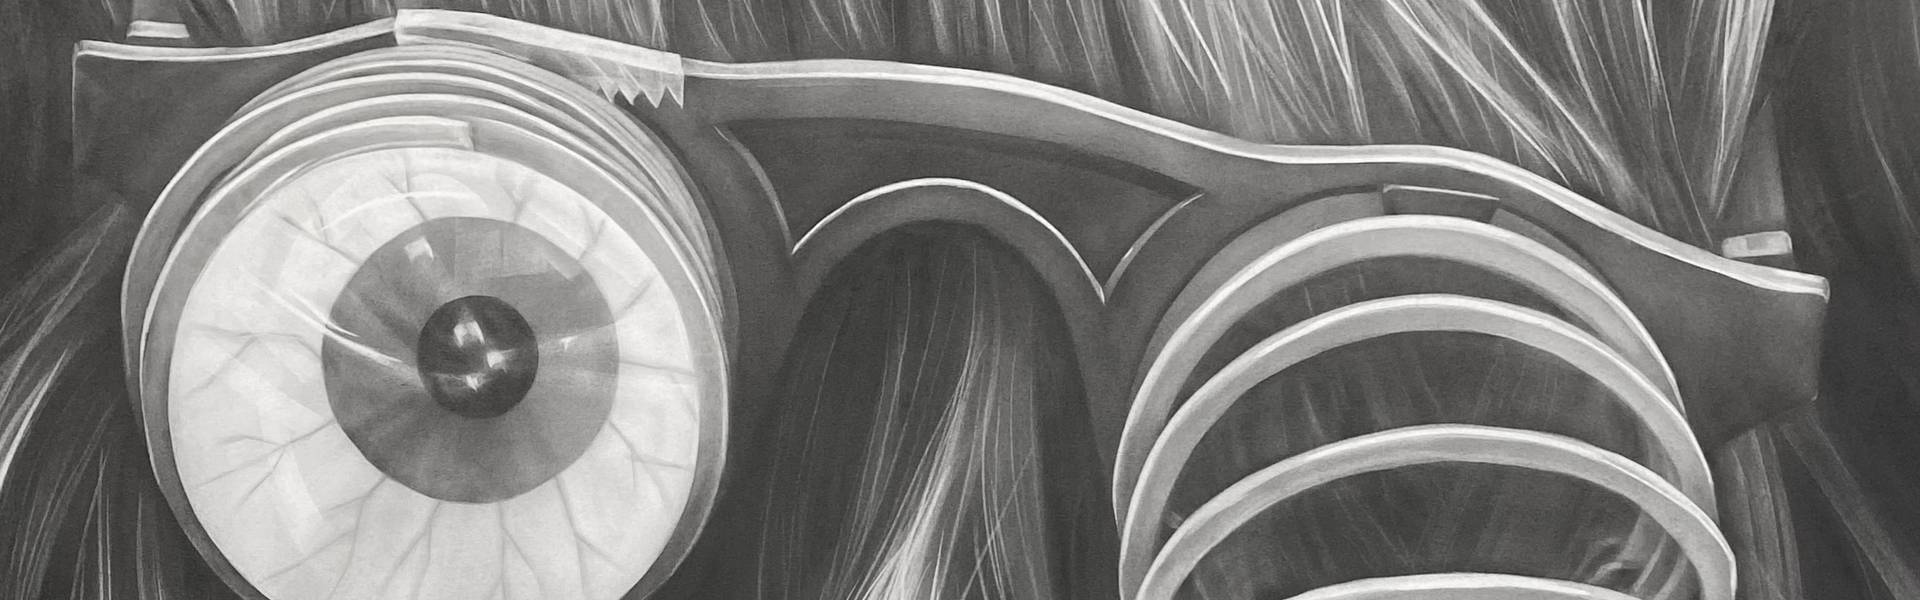 Graphite drawing showing the back of a woman's hair with toy googly eye glasses.